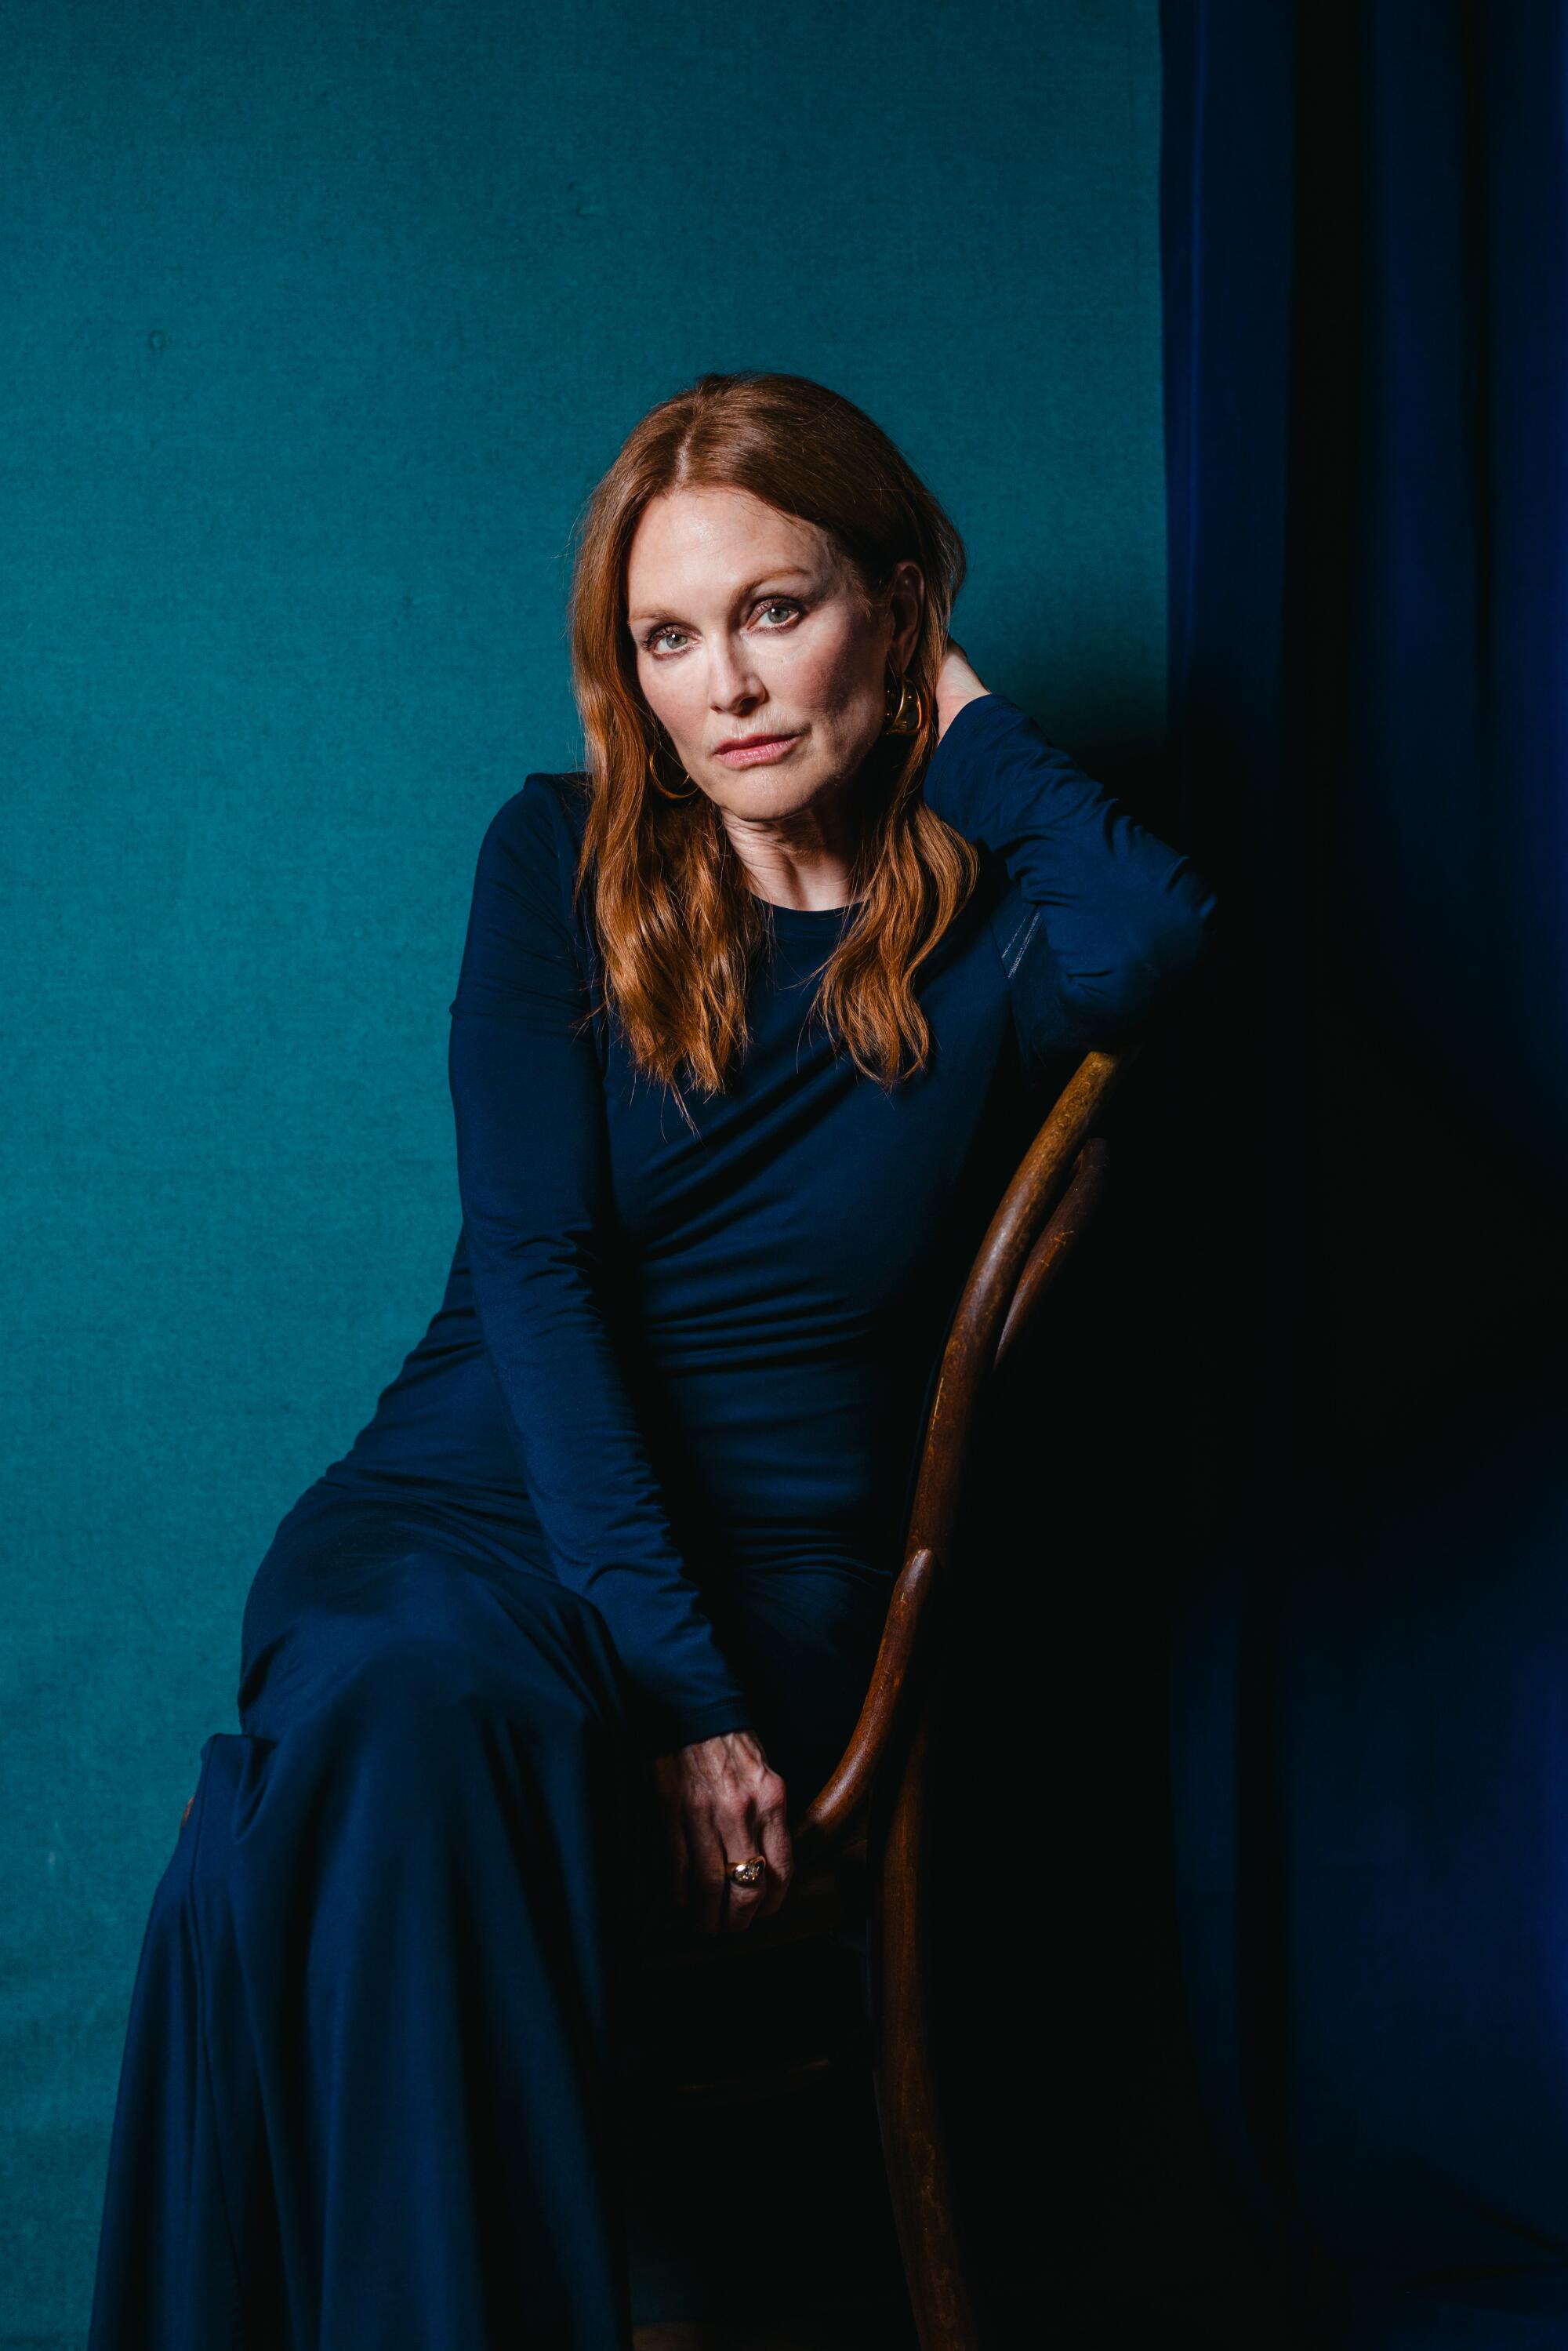 Julianne Moore sits on a wooden chair against a blue backdrop and curtain for a portrait.